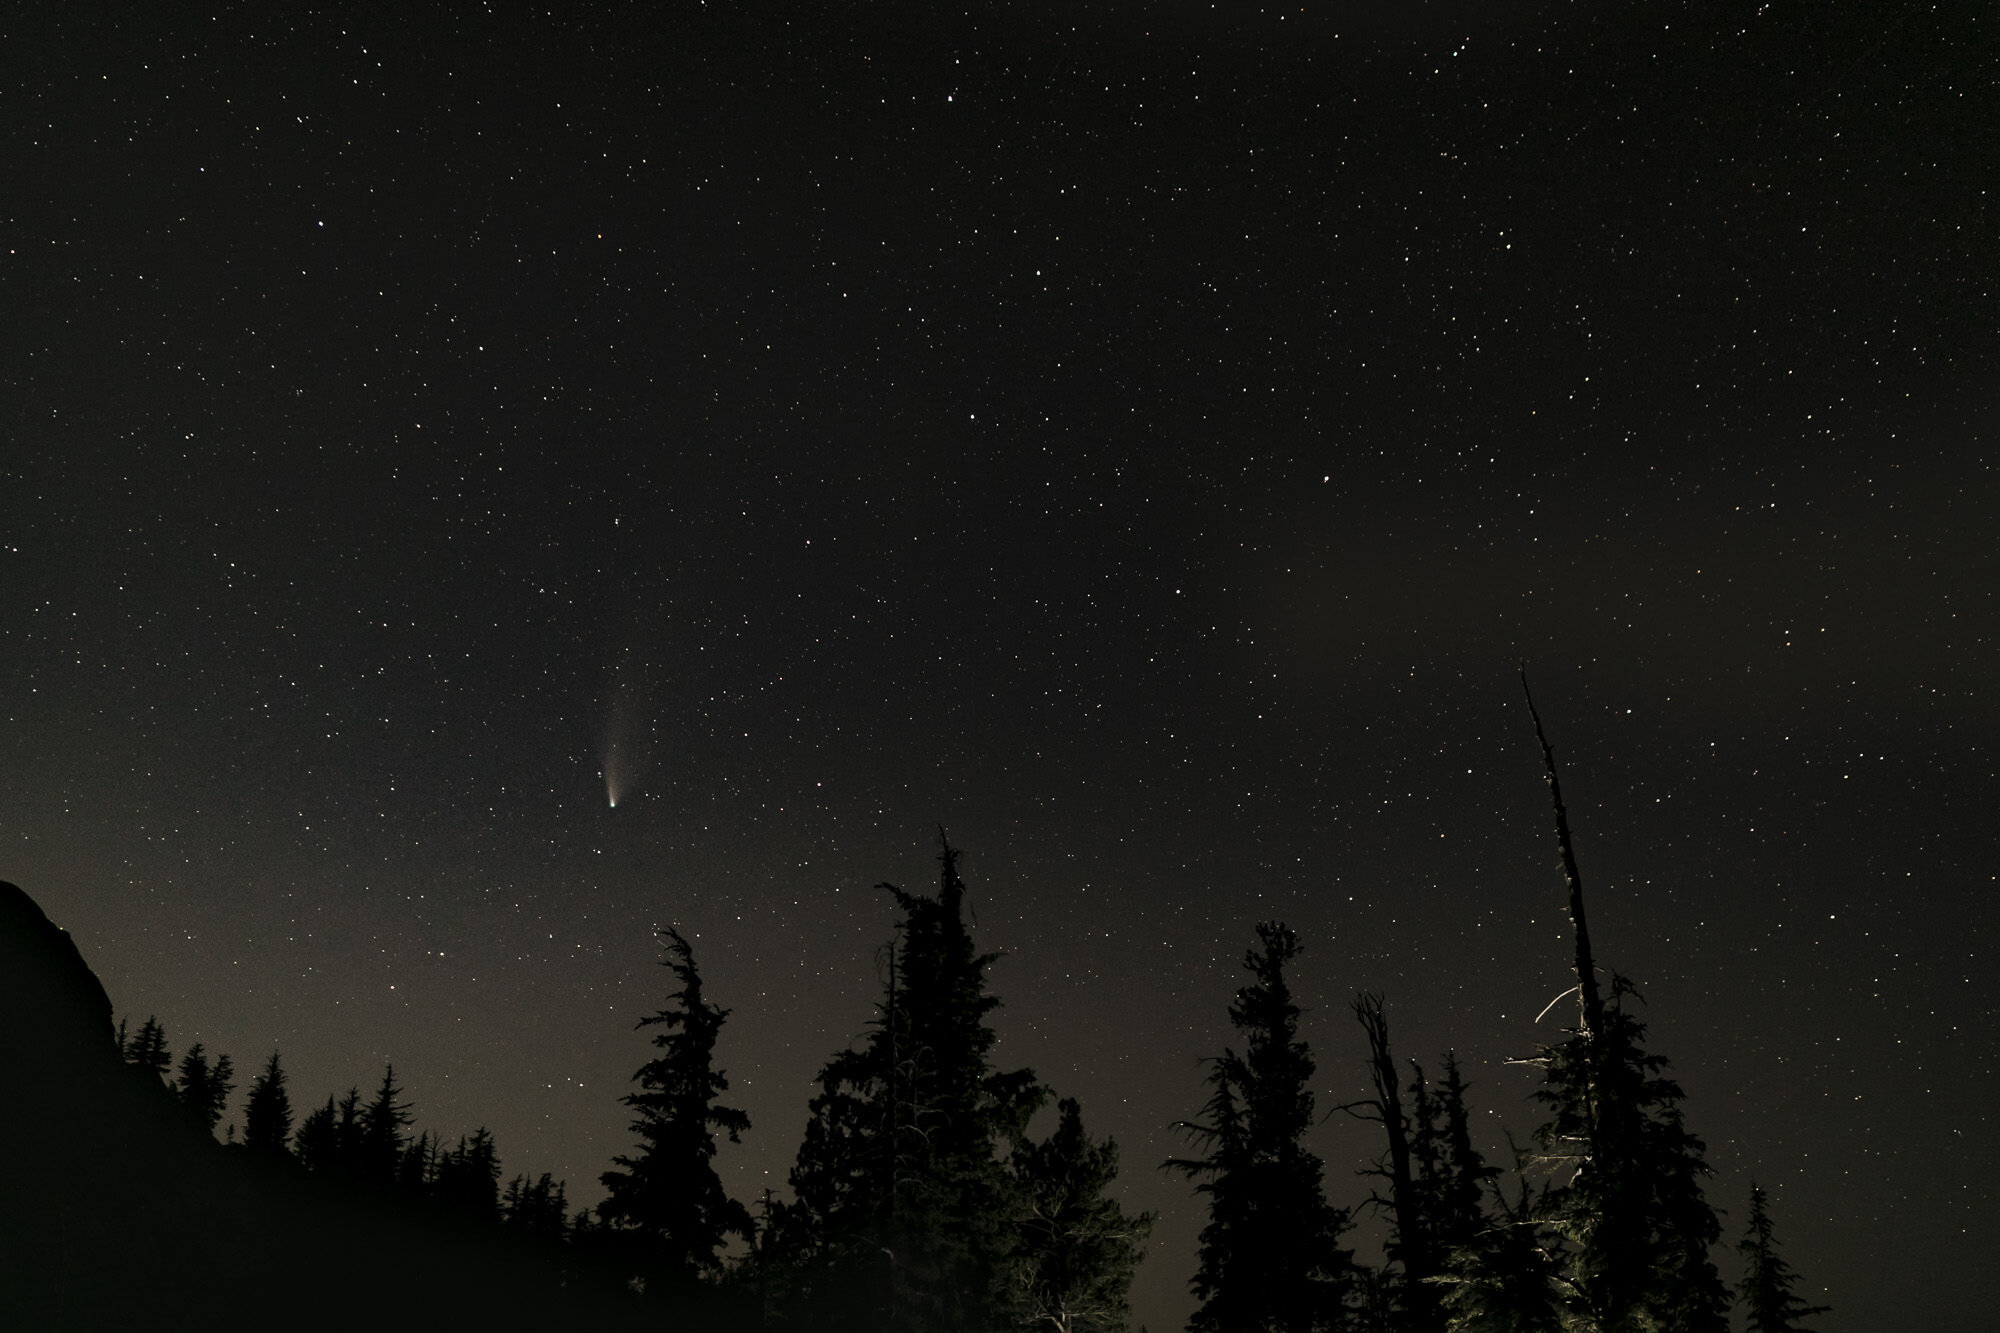 Night exposure of the Neowise comet as seen from the Sierra Nevada mountains in California